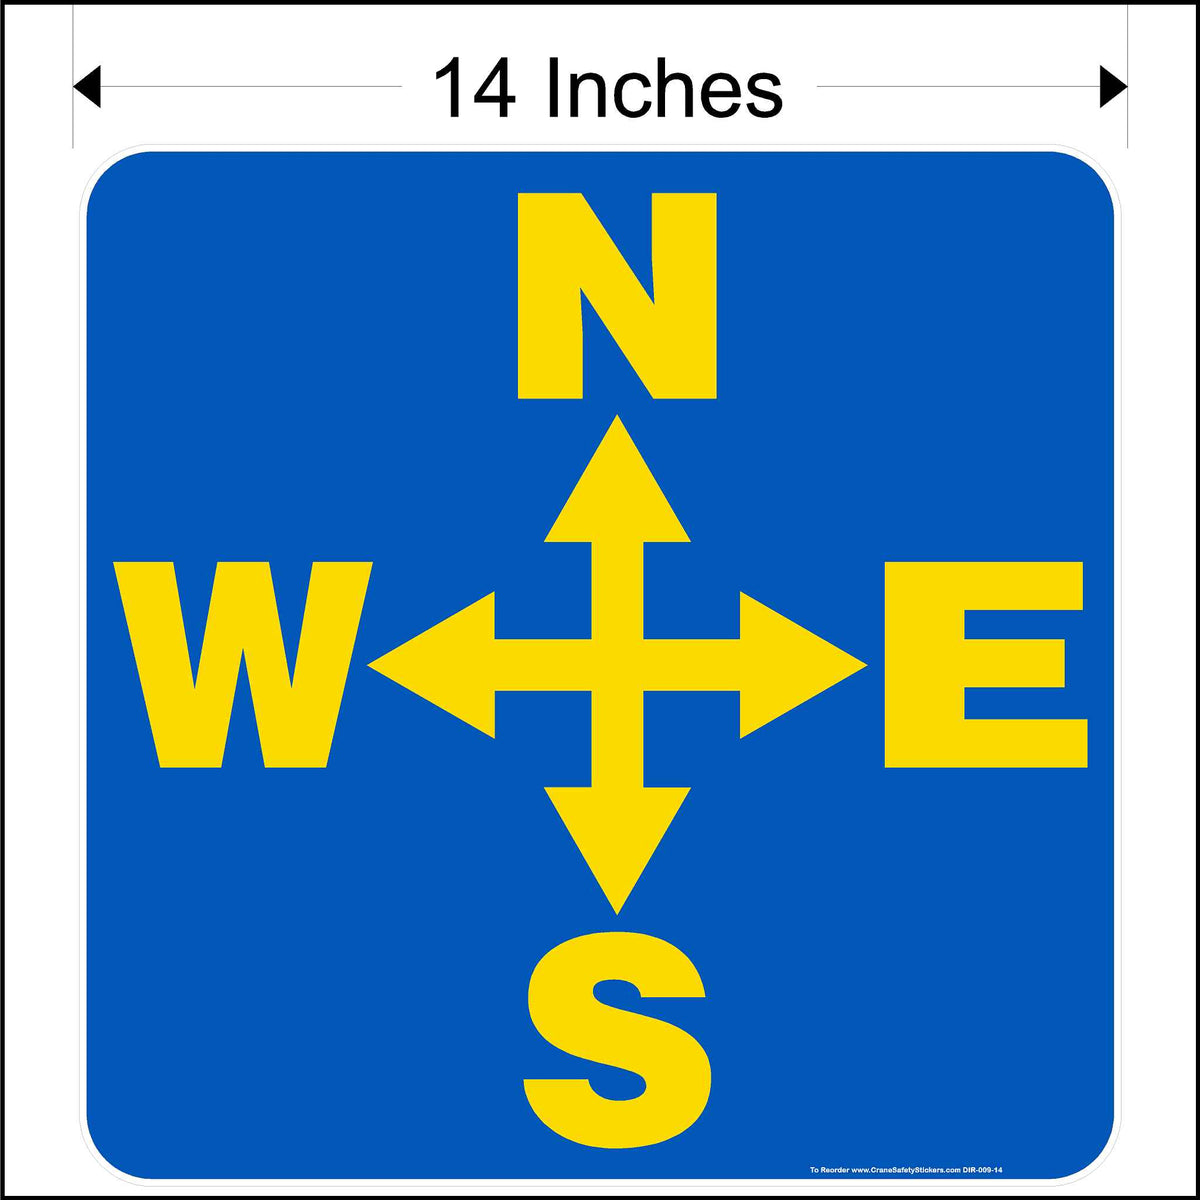 14 inch overhead crane directional decal printed with yellow north, south, east, and west arrows on a blue background.